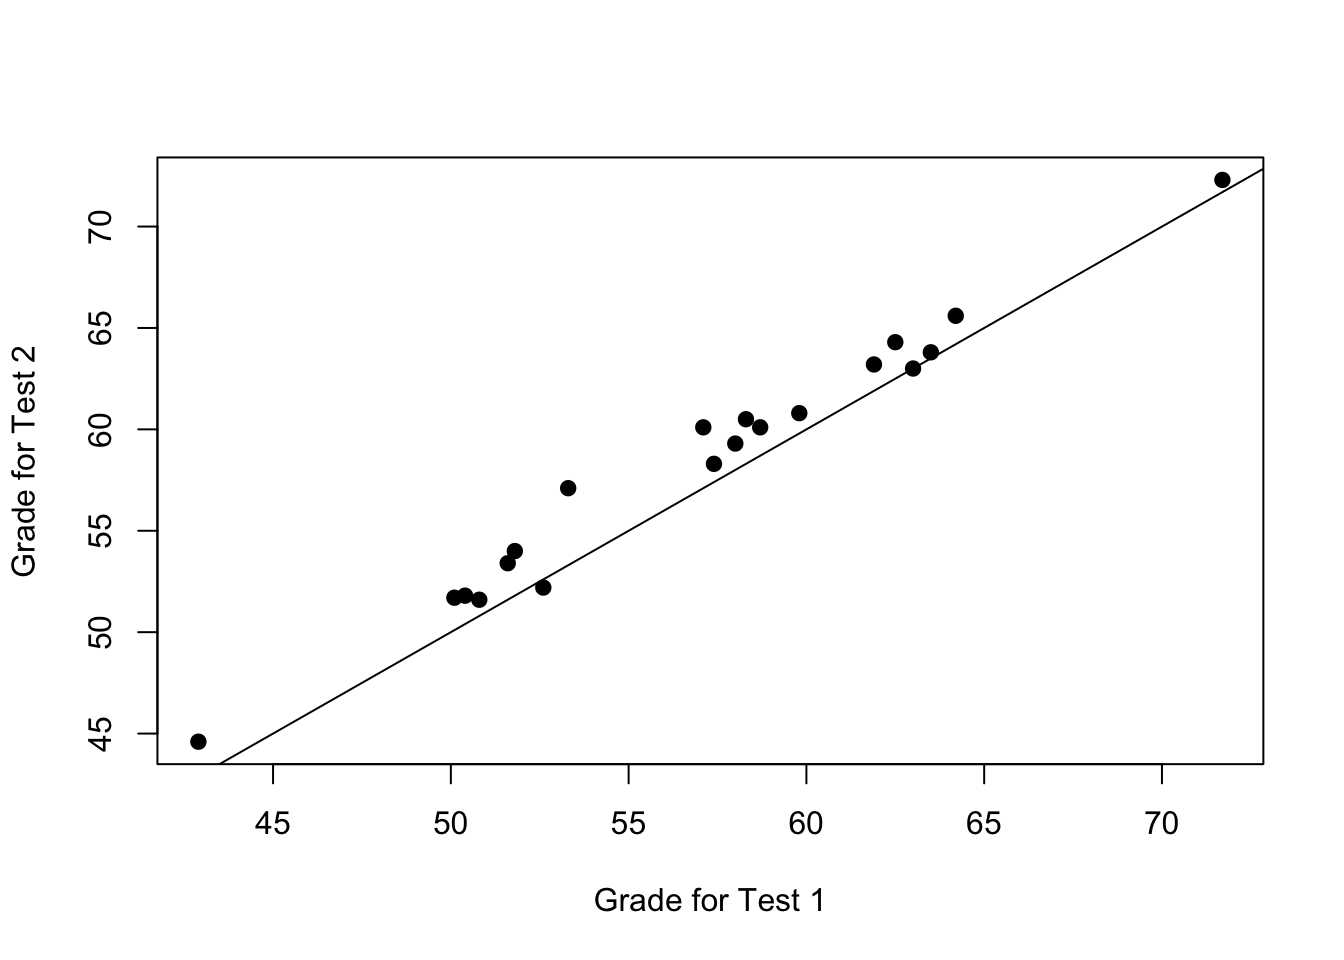 Scatterplot showing the individual grades for test 1 and test 2